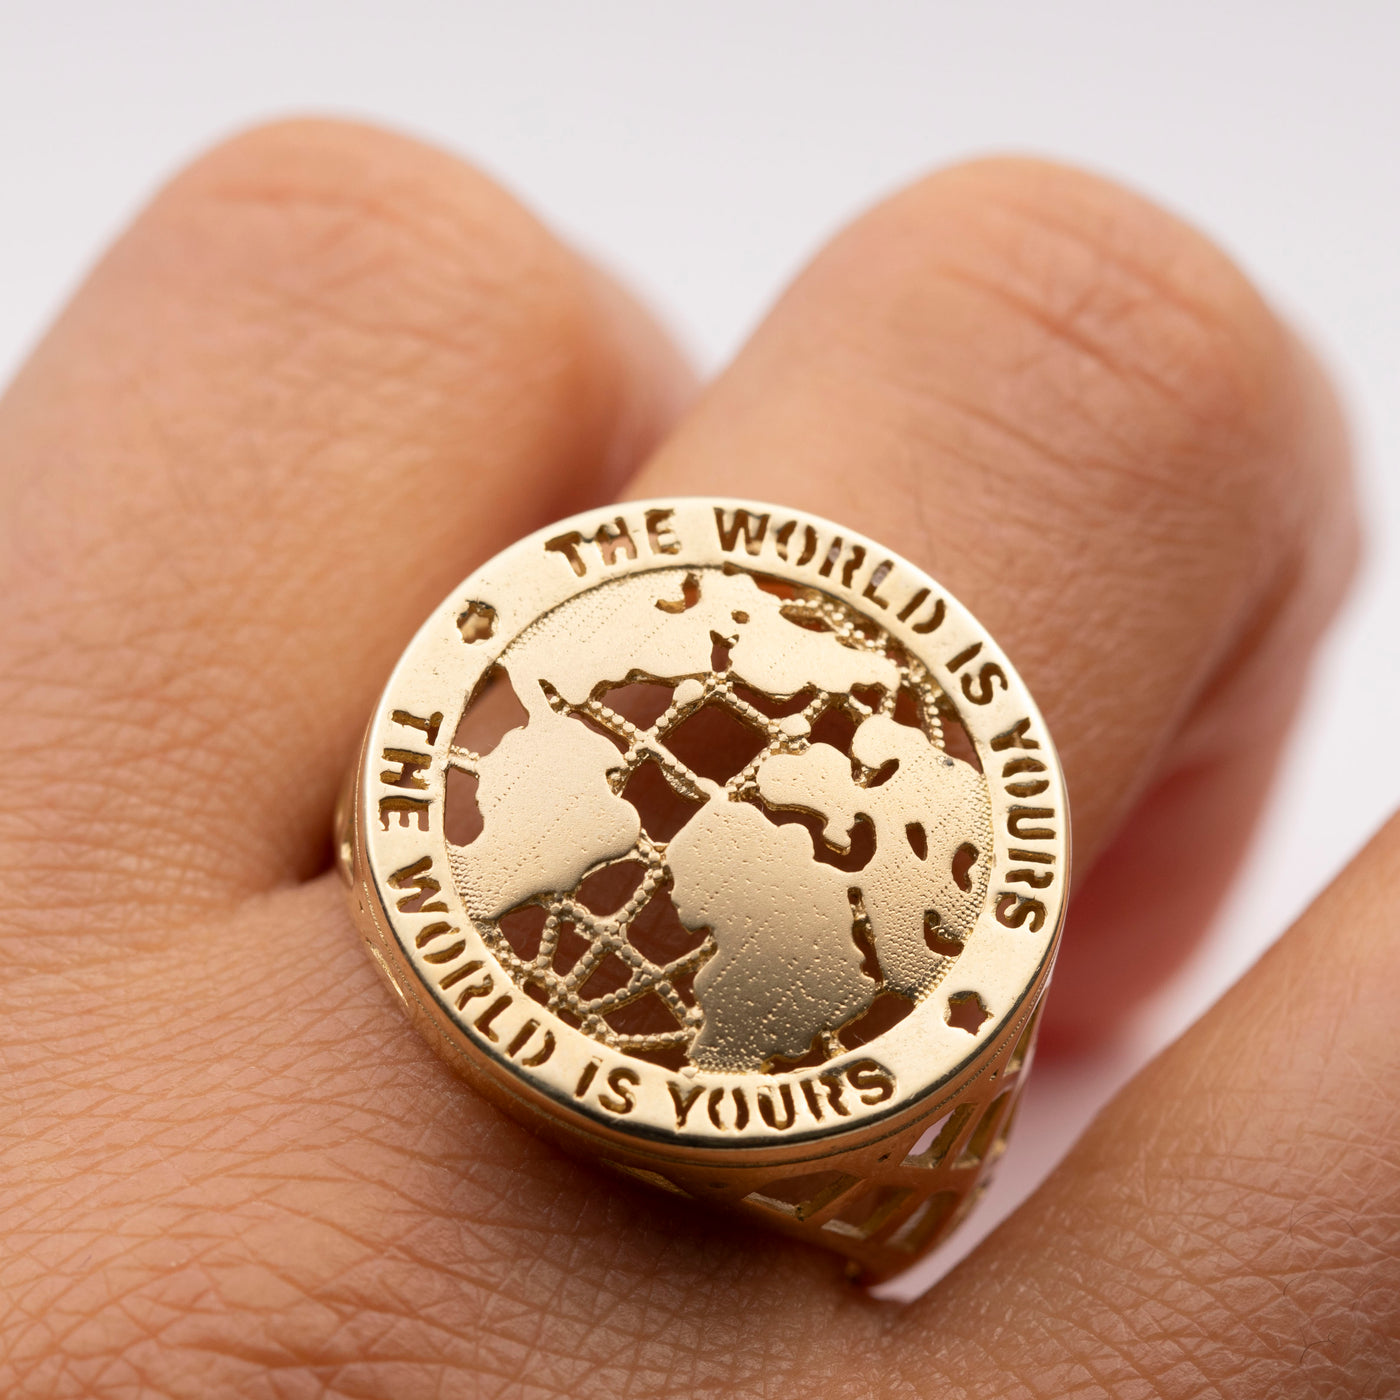 Men's "The World is Yours" Ring 10K Yellow Gold